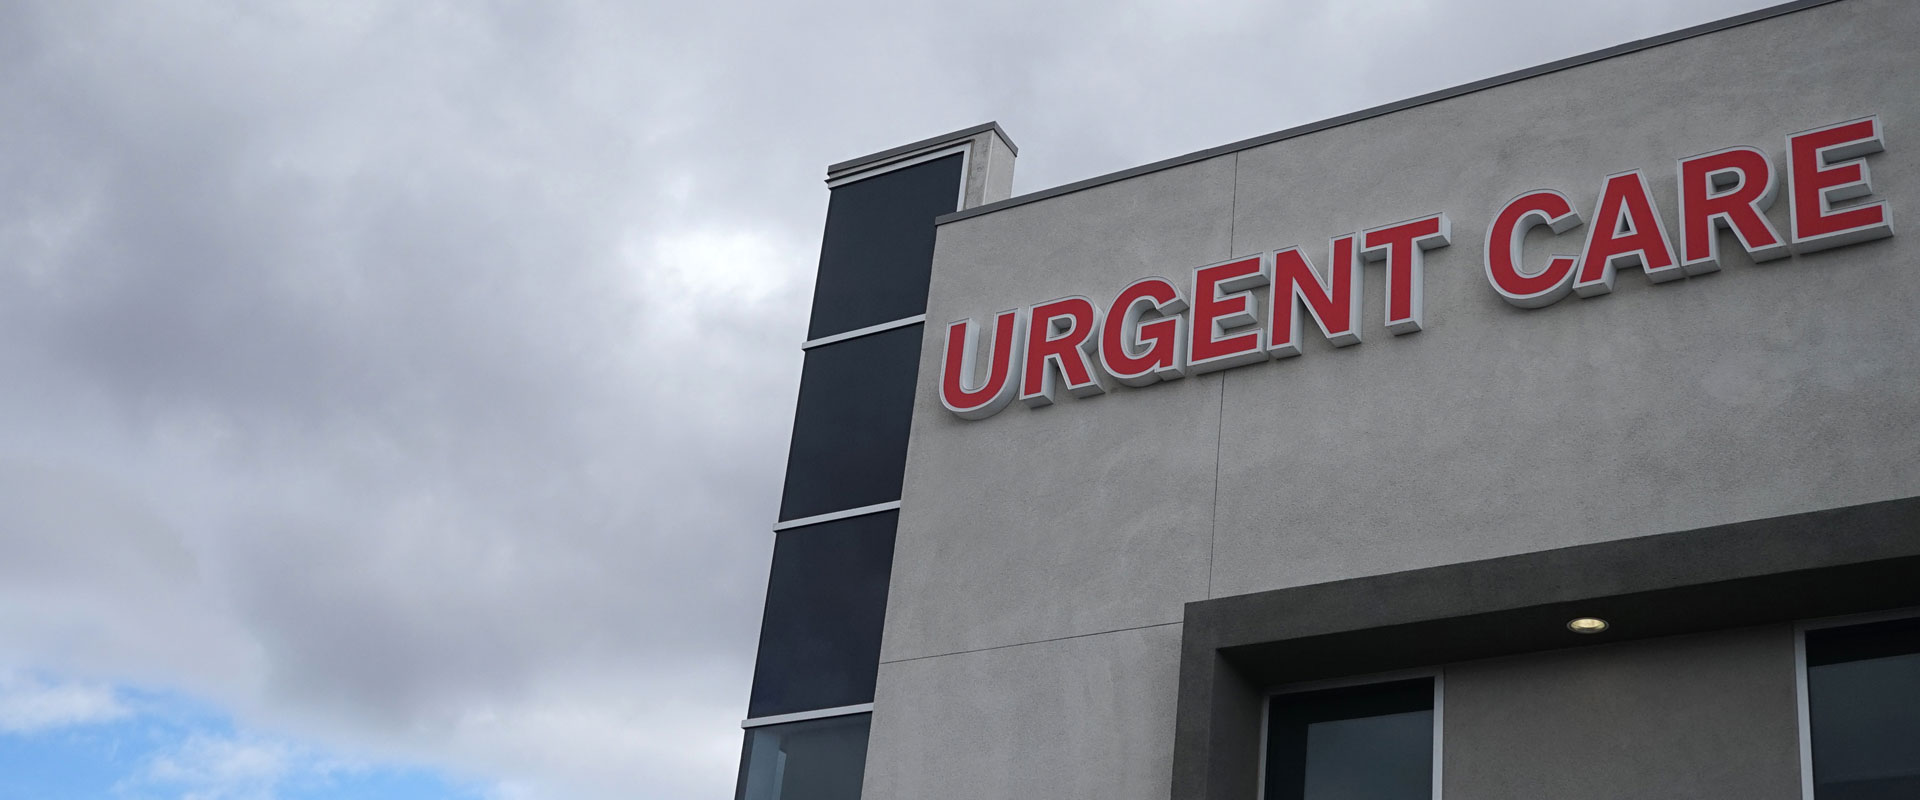 Marketing for Urgent Care Offices